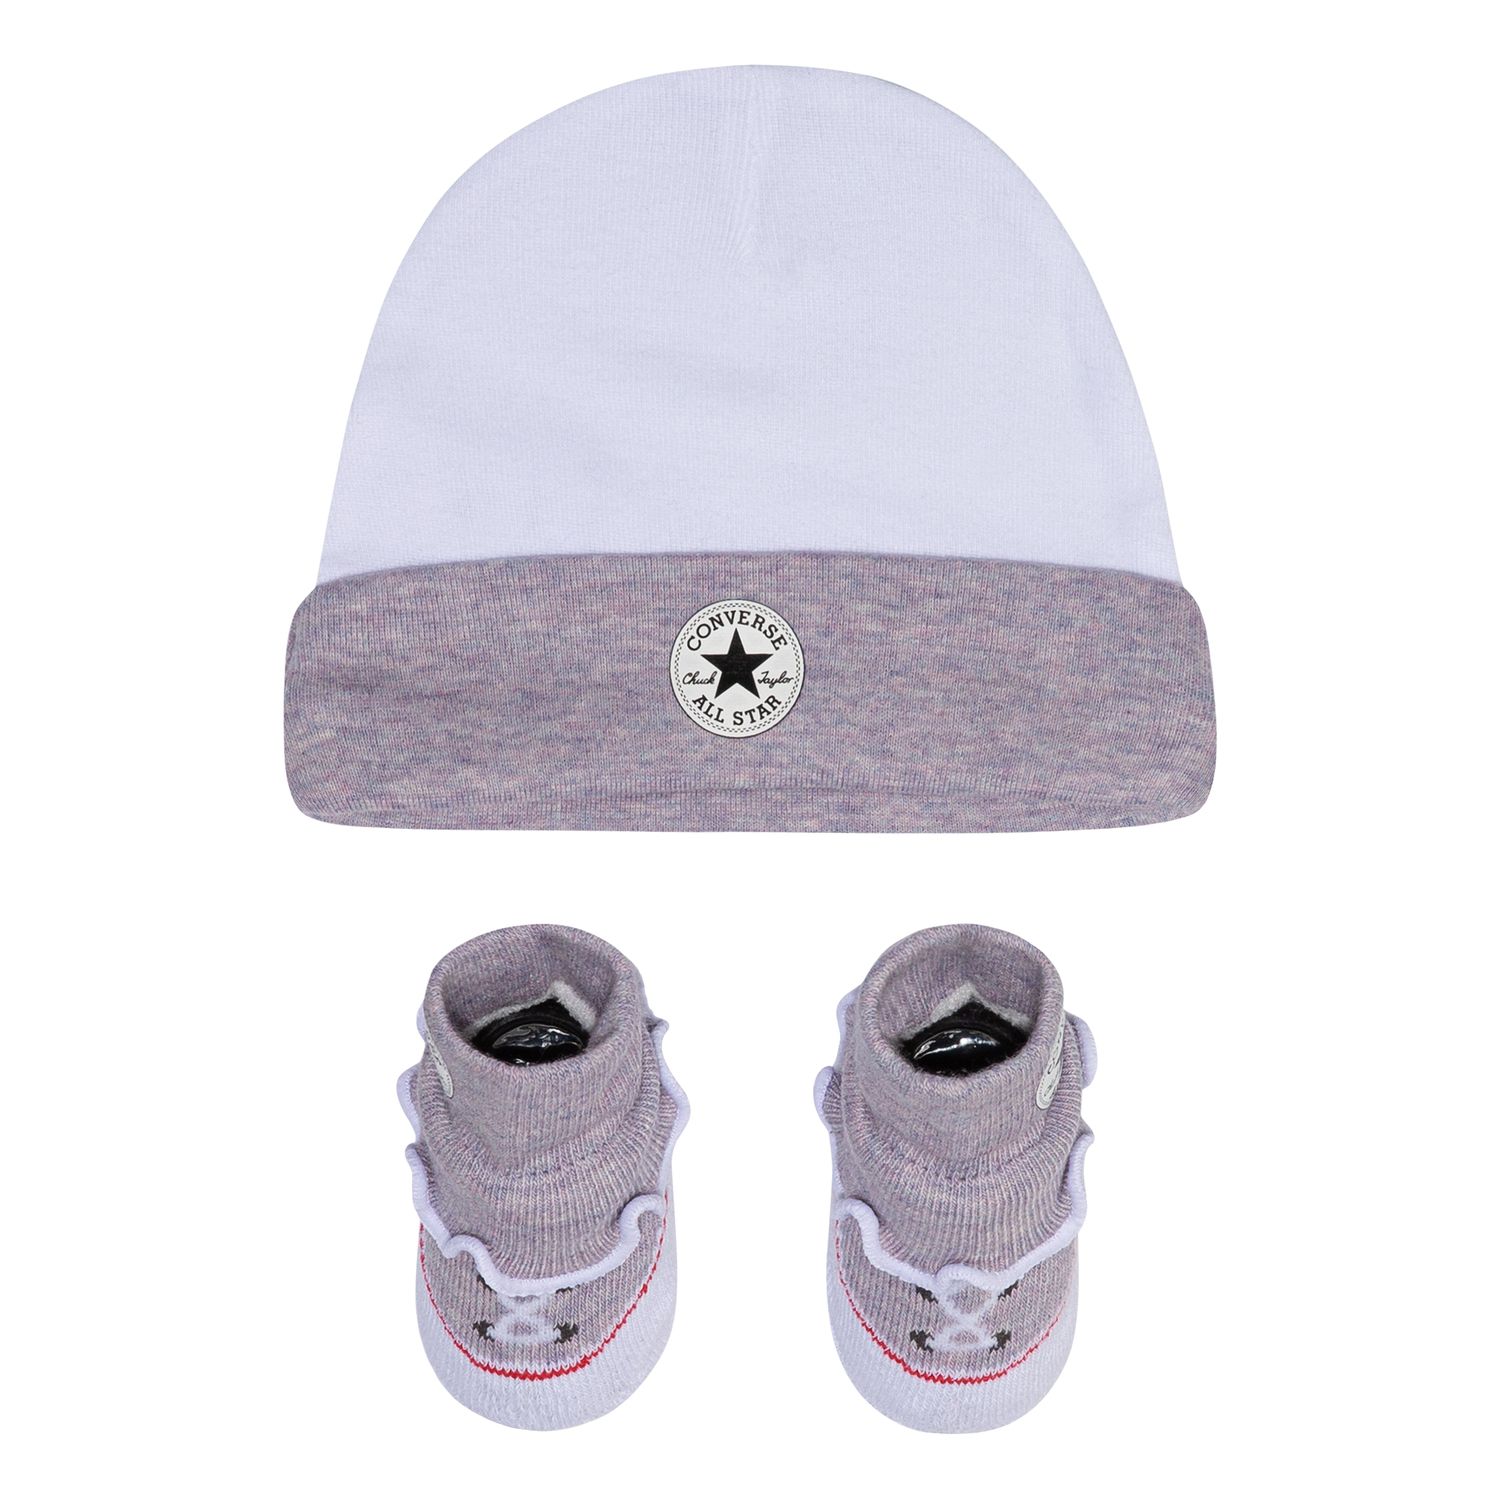 converse baby hat and socks set